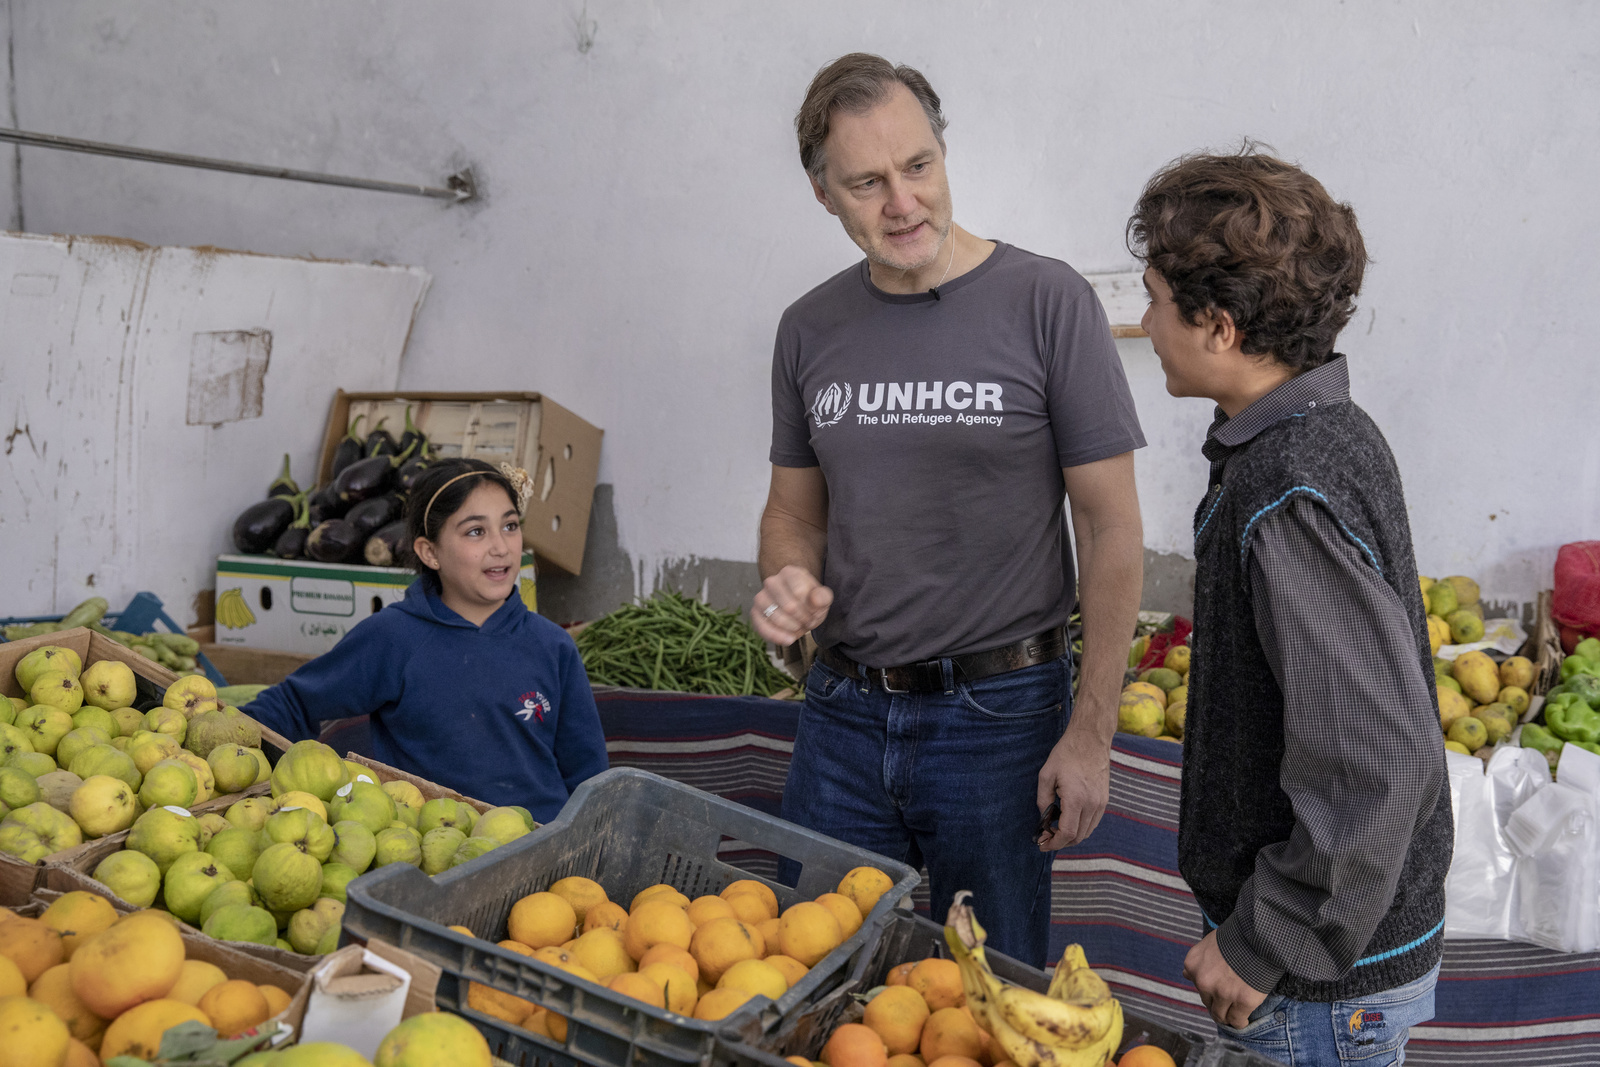 David Morrissey visits Cairo with UNHCR